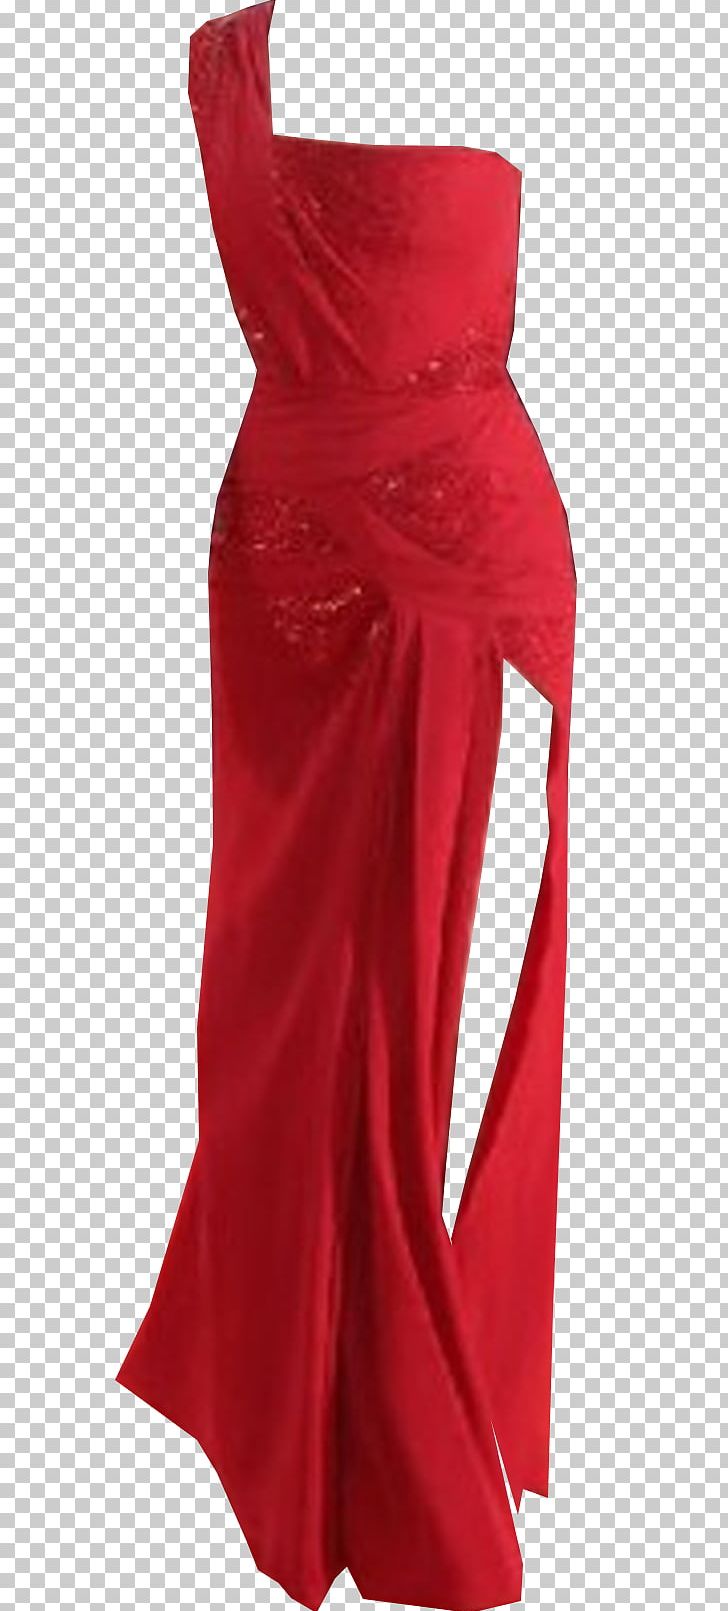 Cocktail Dress Gown Velvet Fashion PNG, Clipart, Bridal Party Dress, Clothing, Cocktail Dress, Dance Dress, Day Dress Free PNG Download